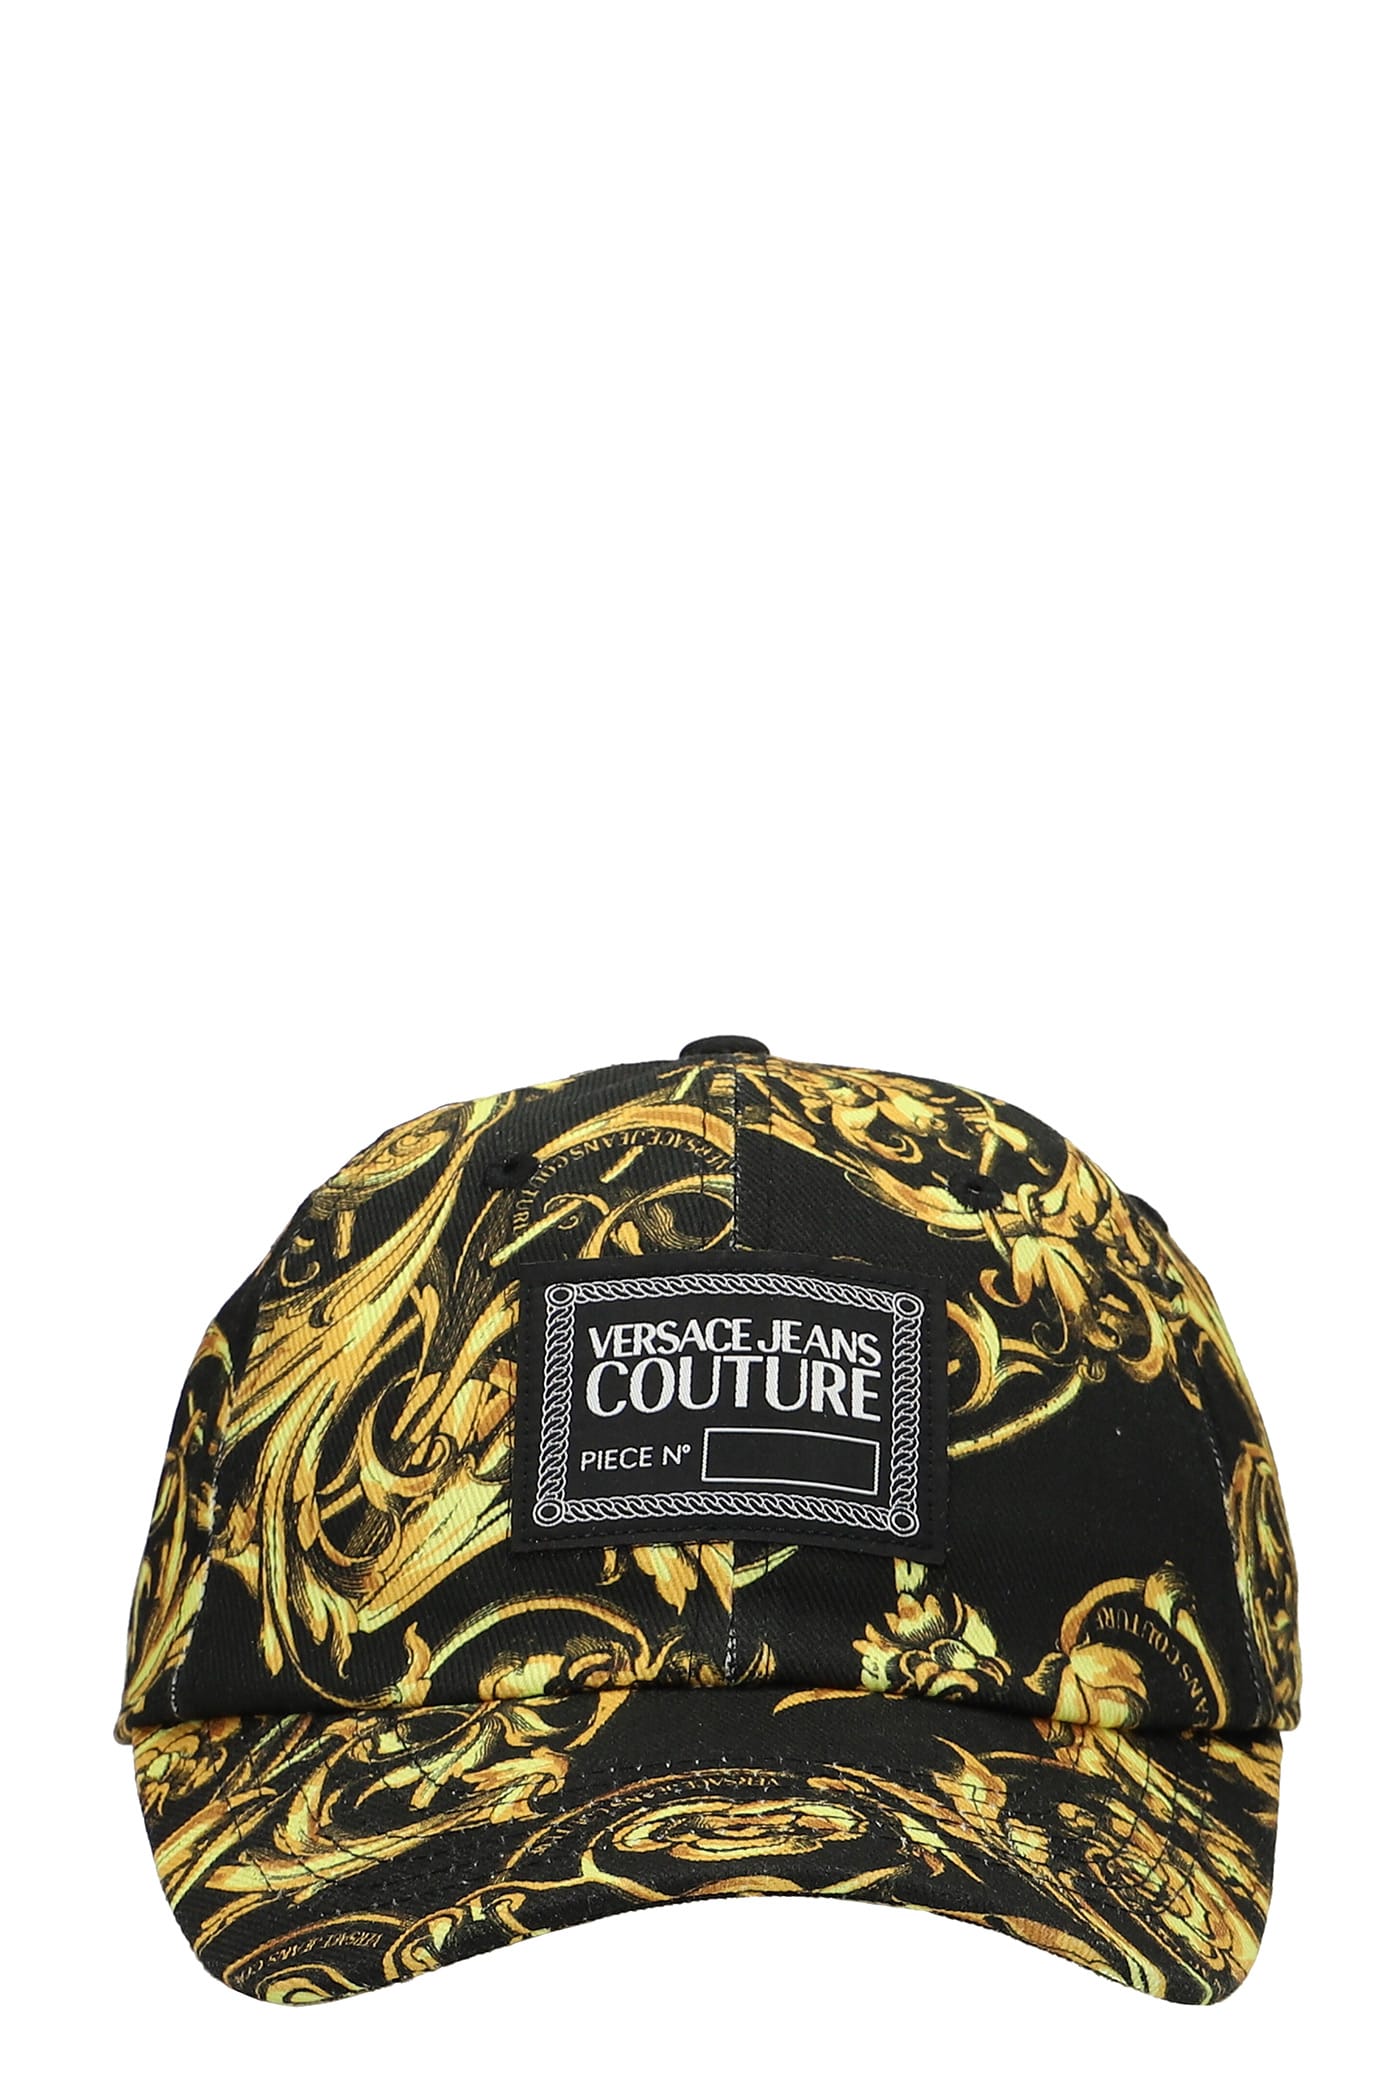 Versace Jeans Couture Hats In Black Canvas